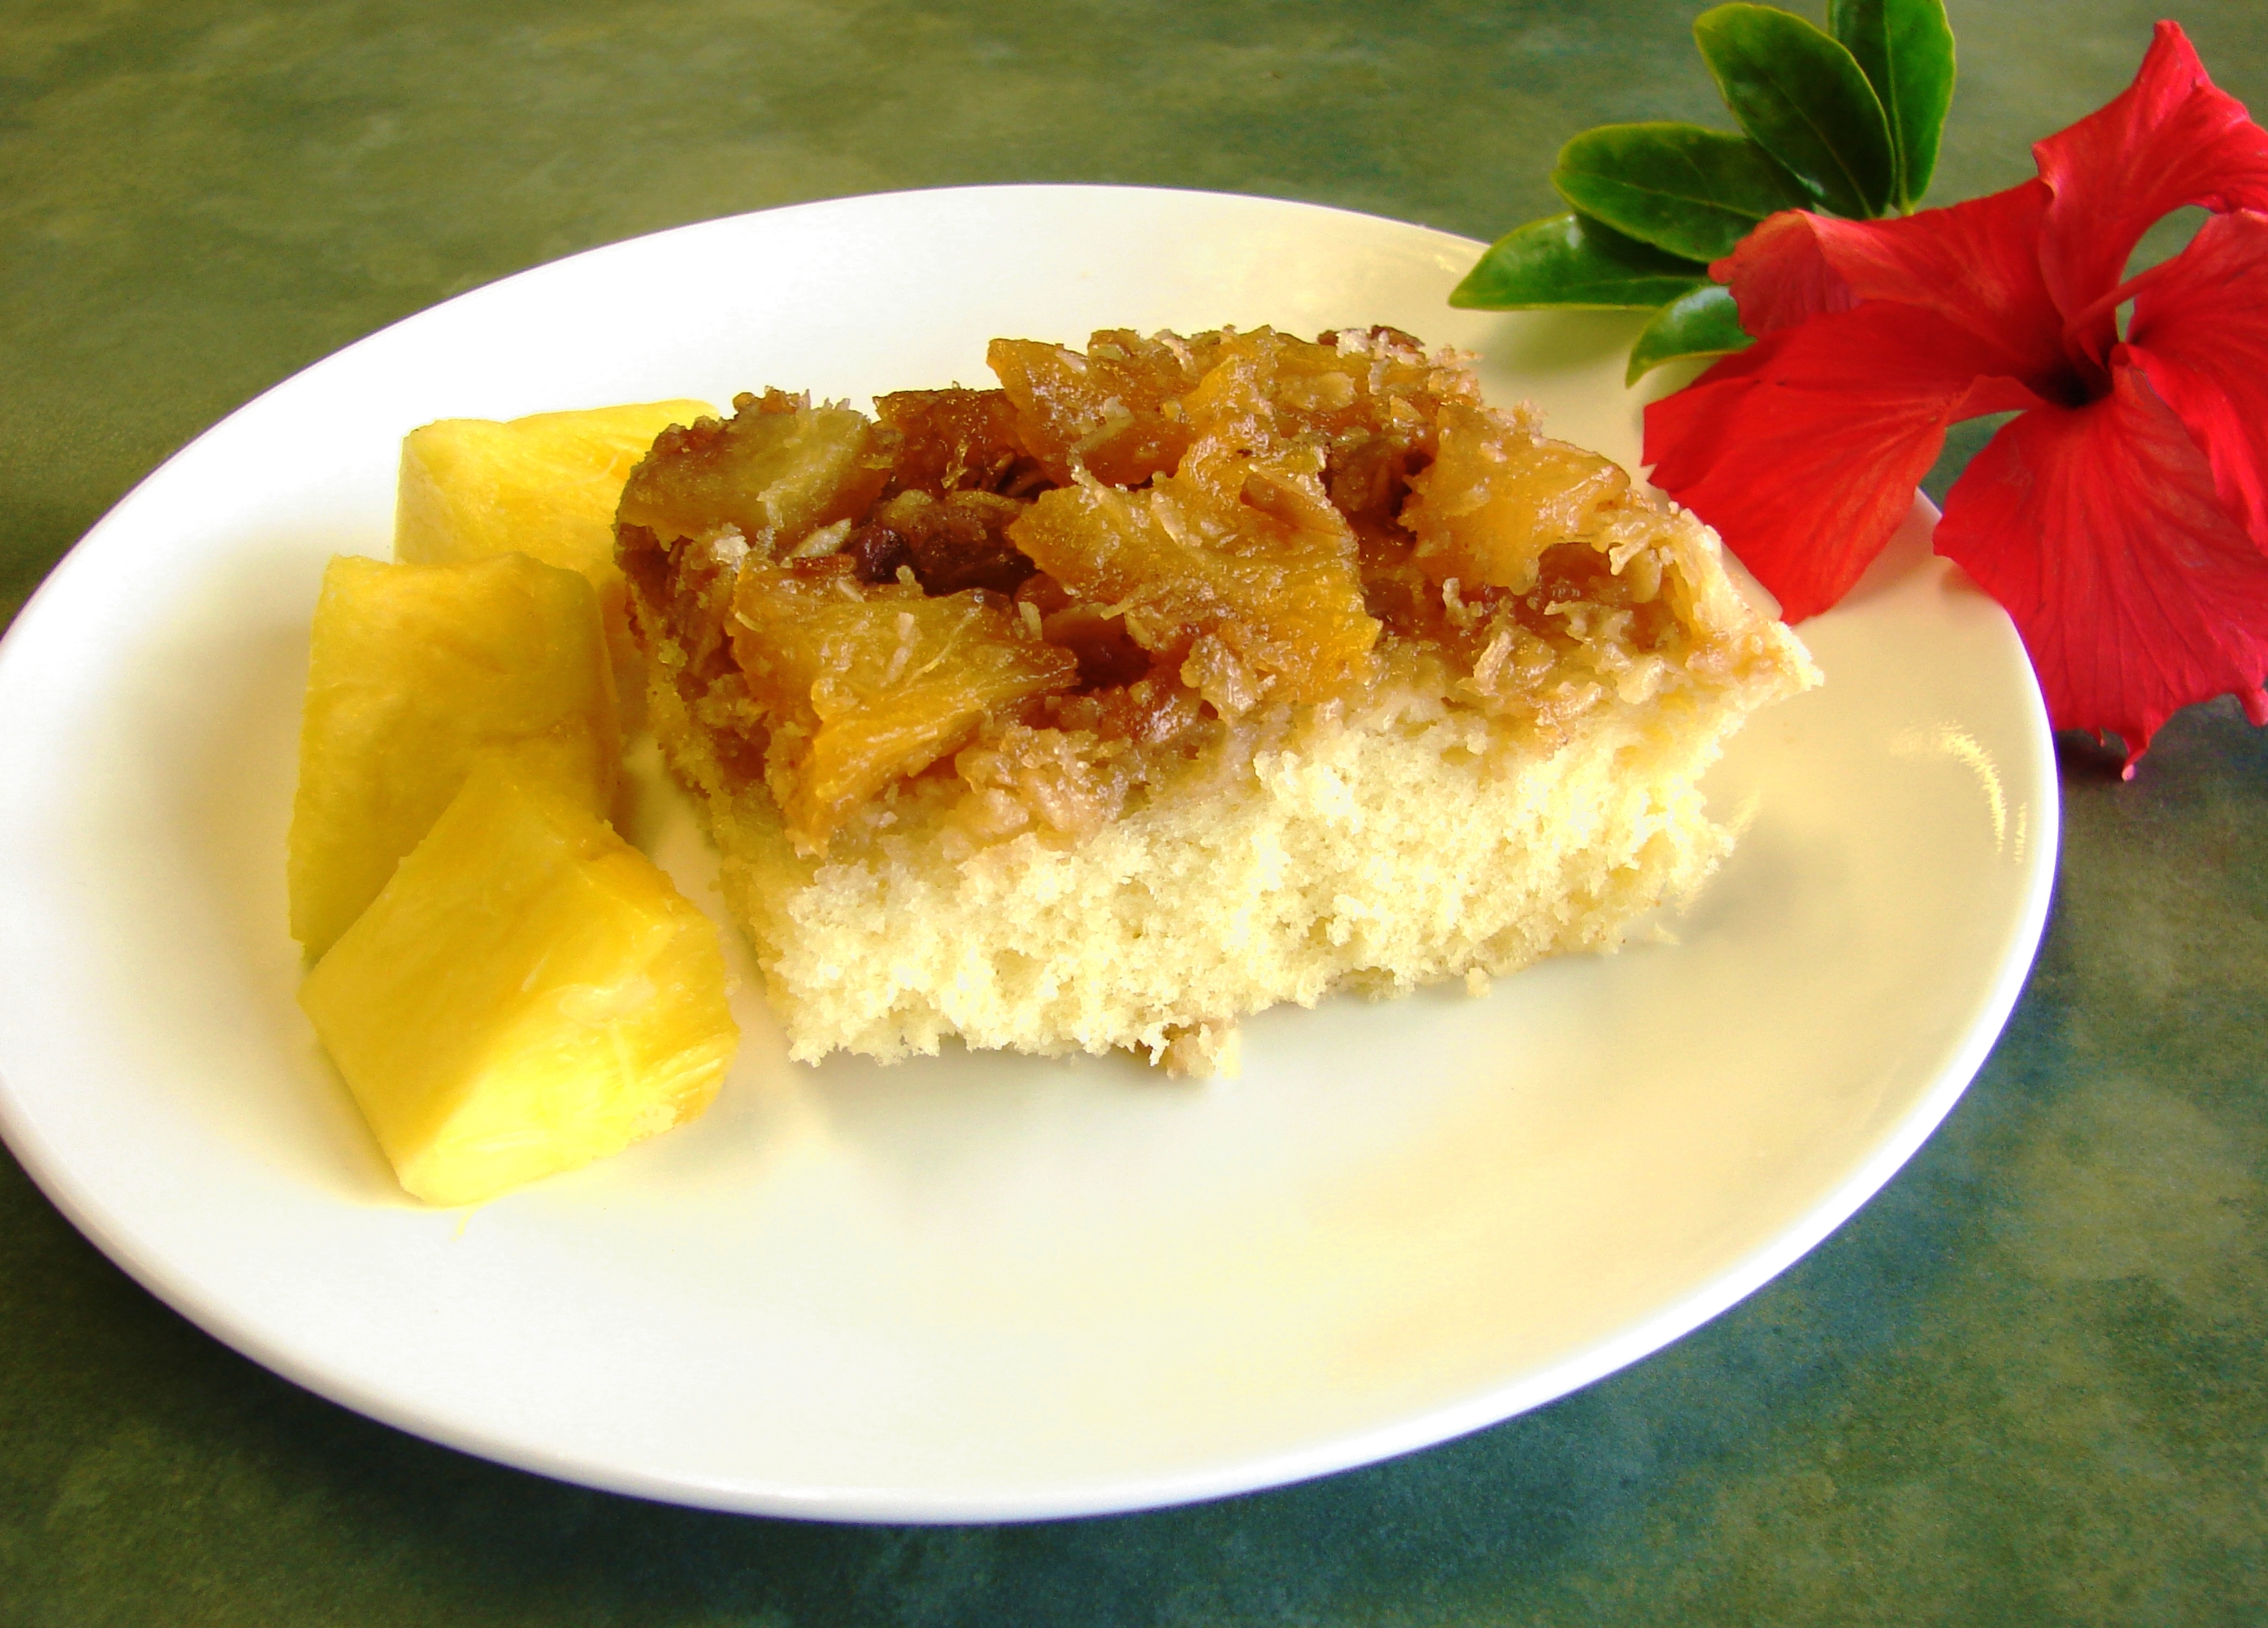 Photo of Tropical Pineapple Upside Down Cake from the Polynesian Cultural Center